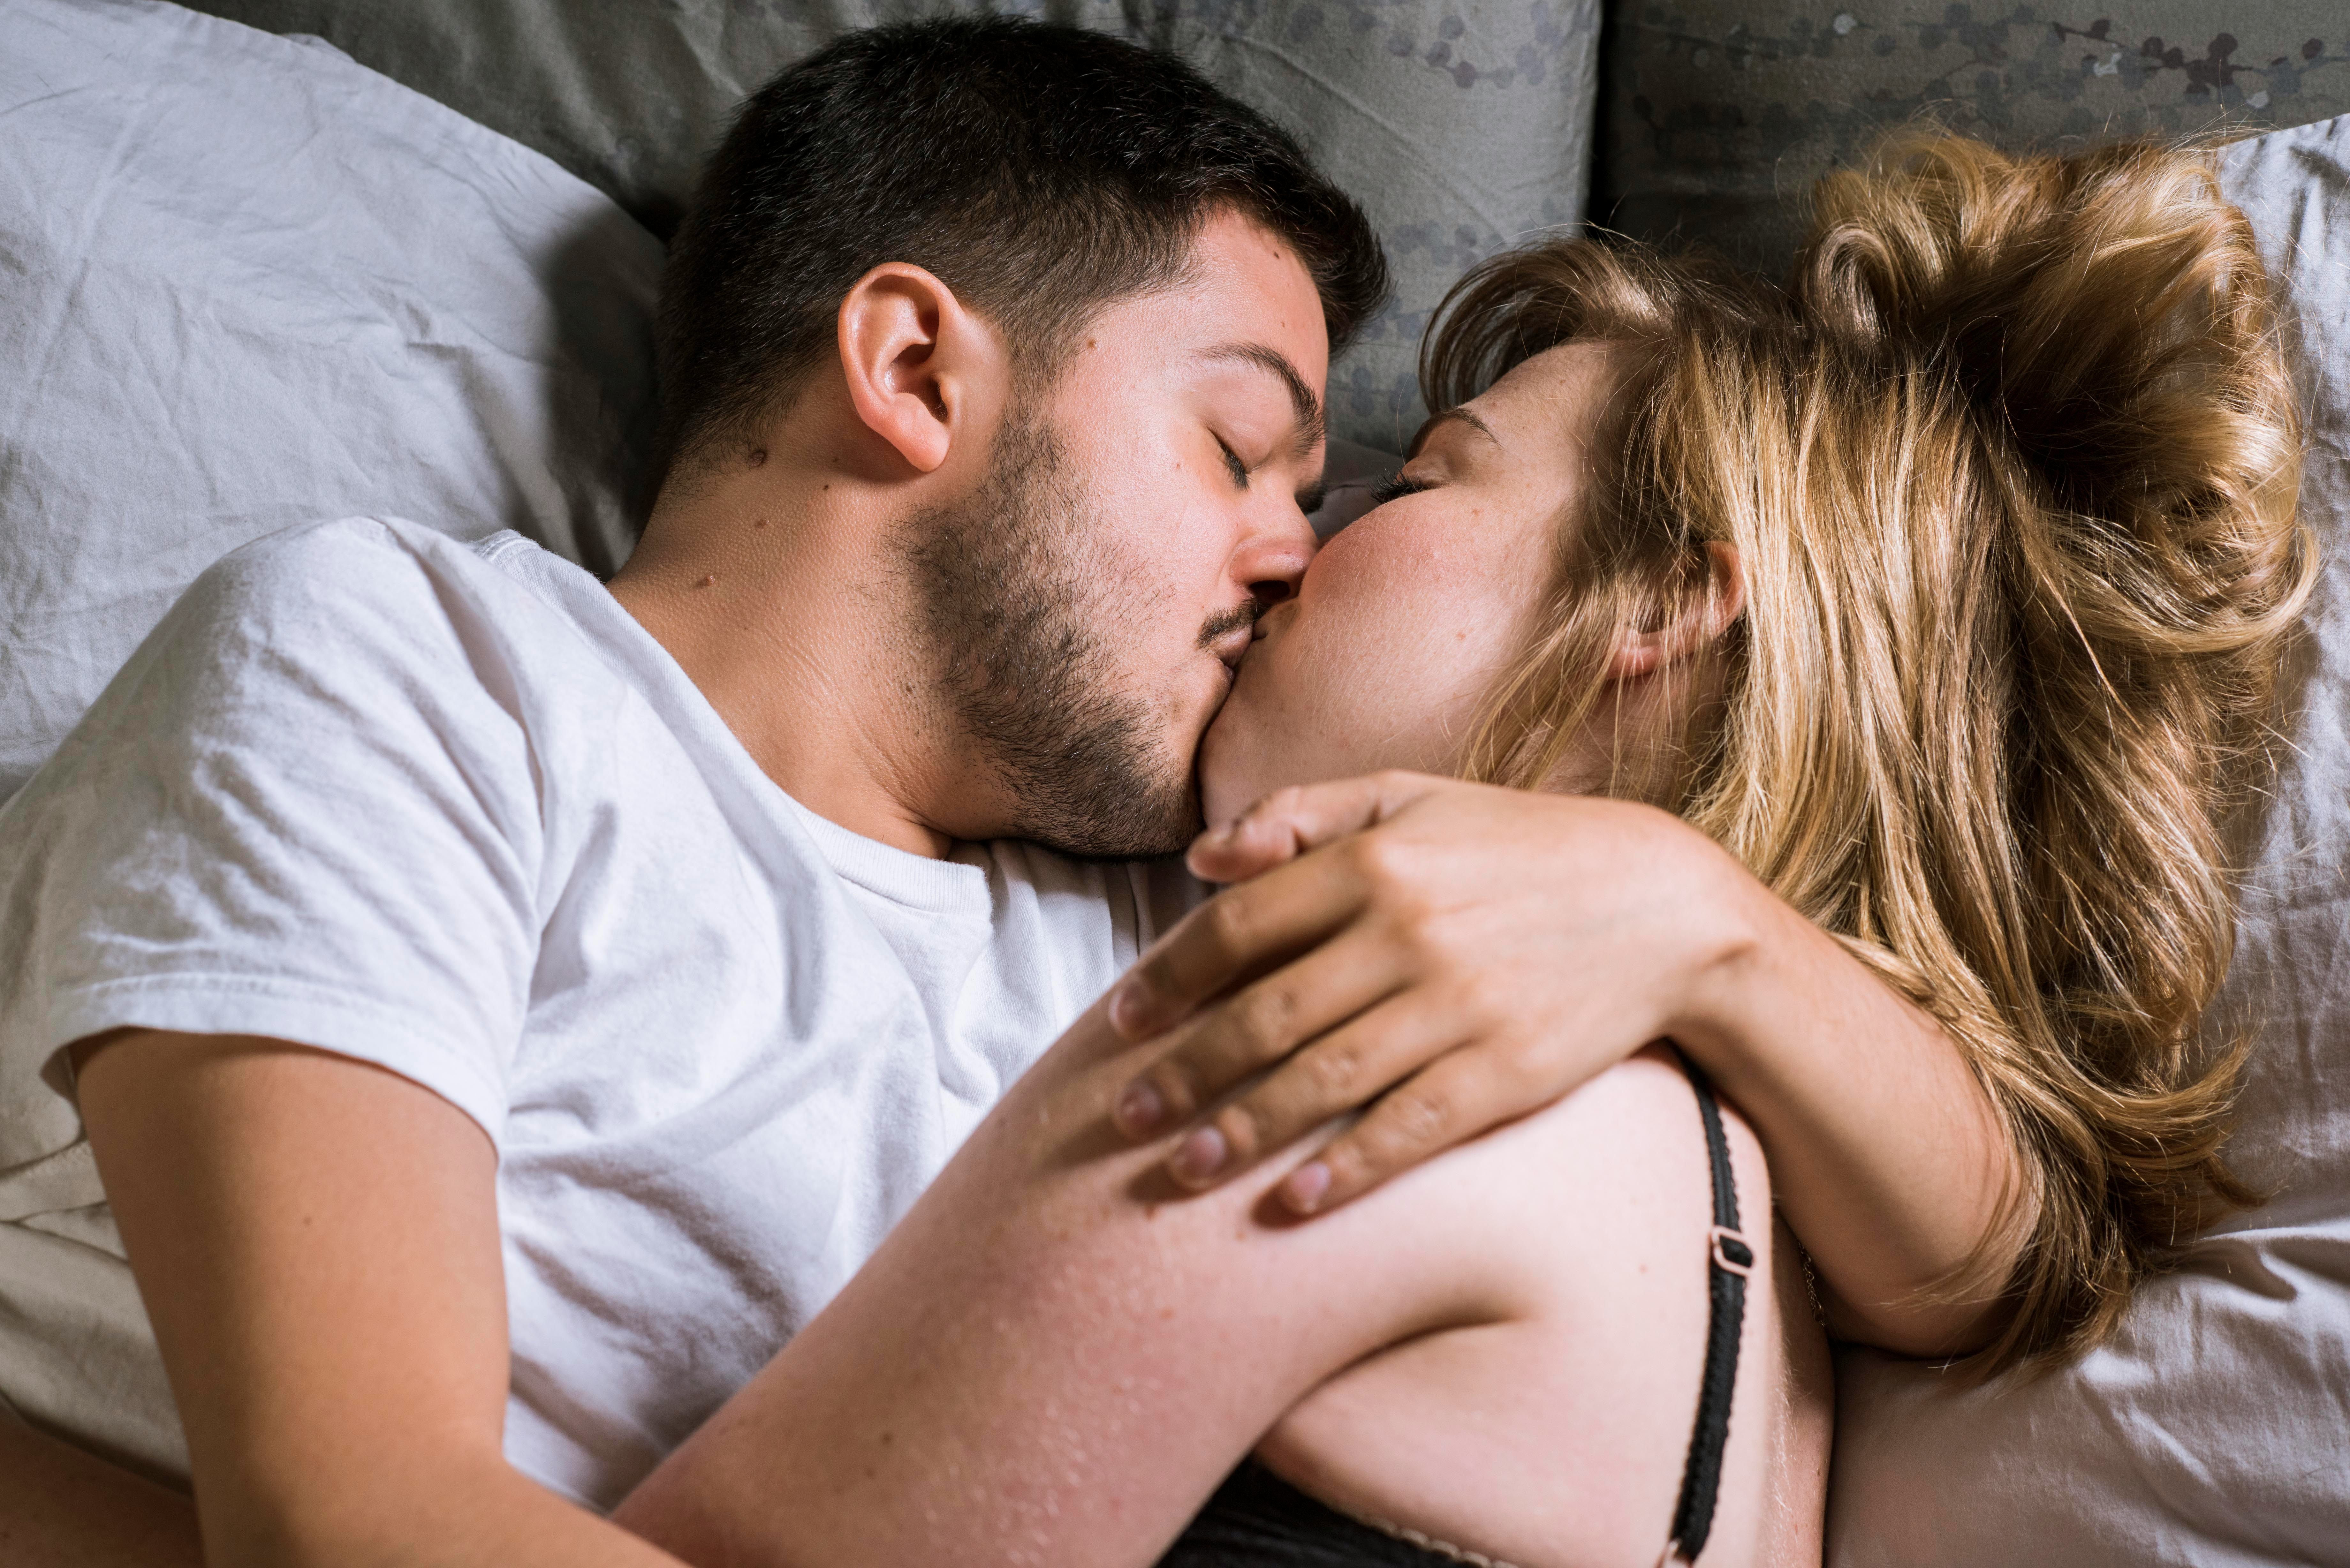 If You And Your Partner Have These 7 Habits Before Bed, Theyre “The One” image